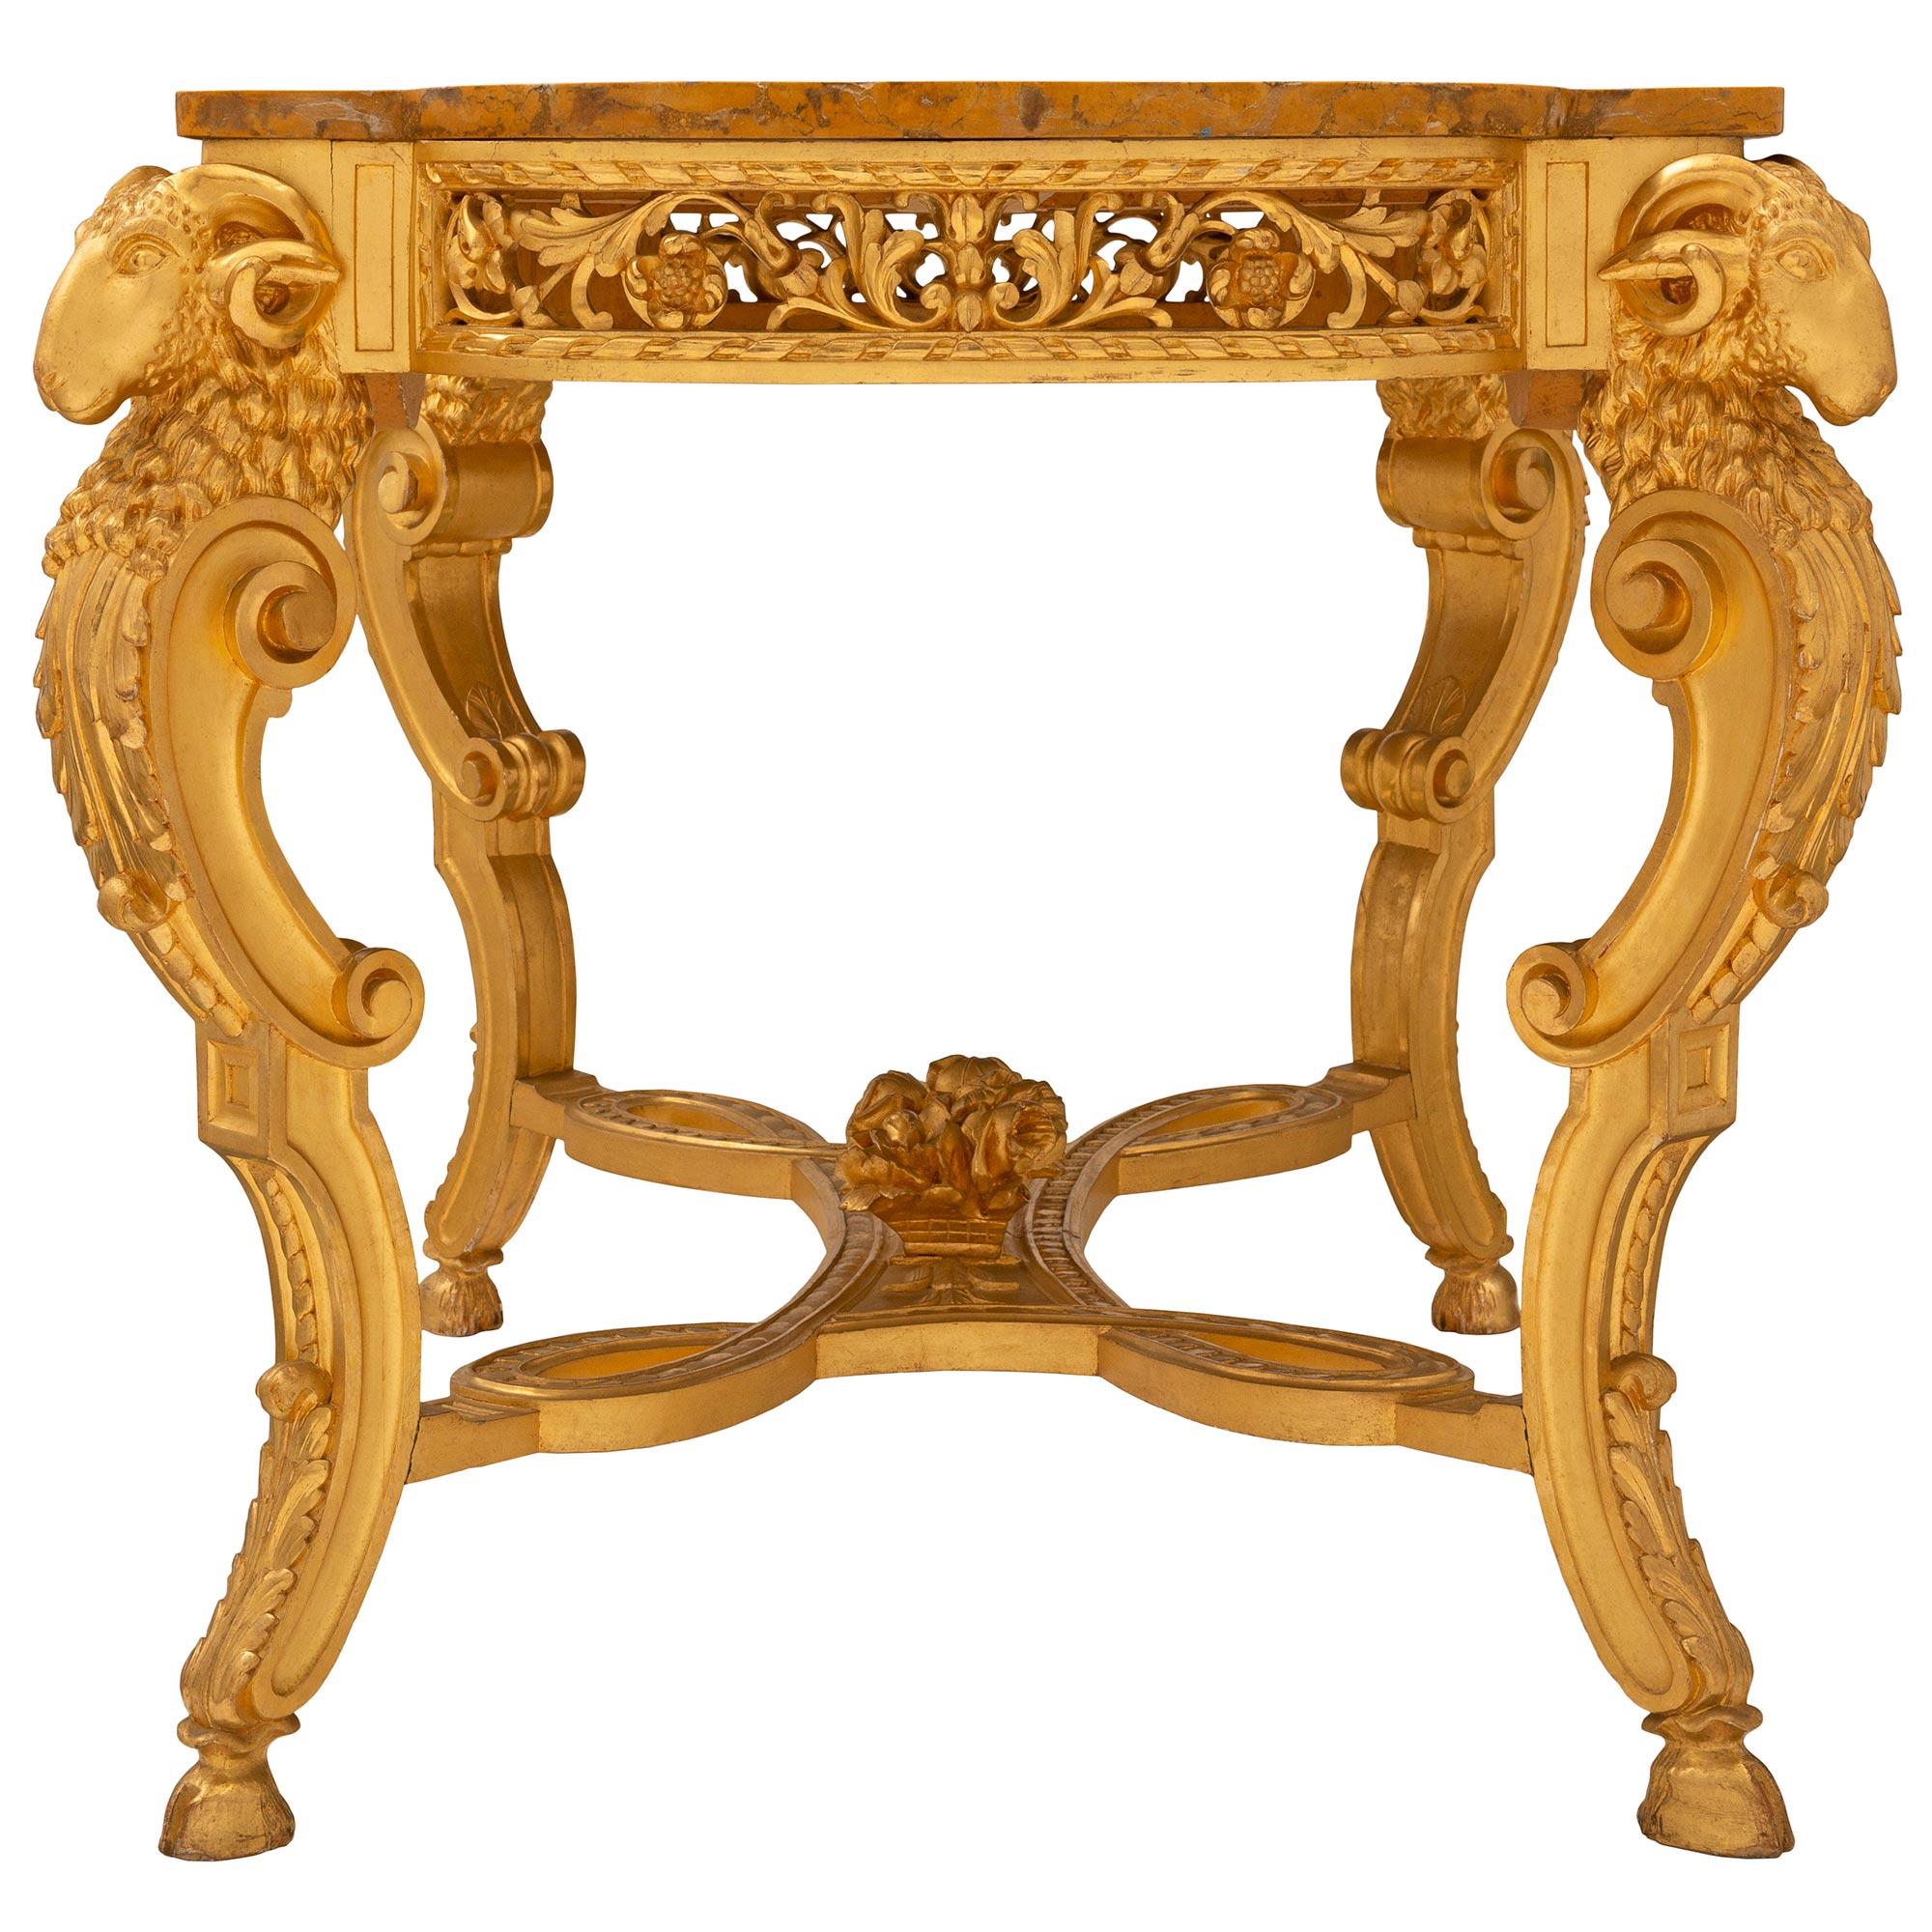 Italian 19th Century Giltwood and Giallo Reale Marble Center Table For Sale 1